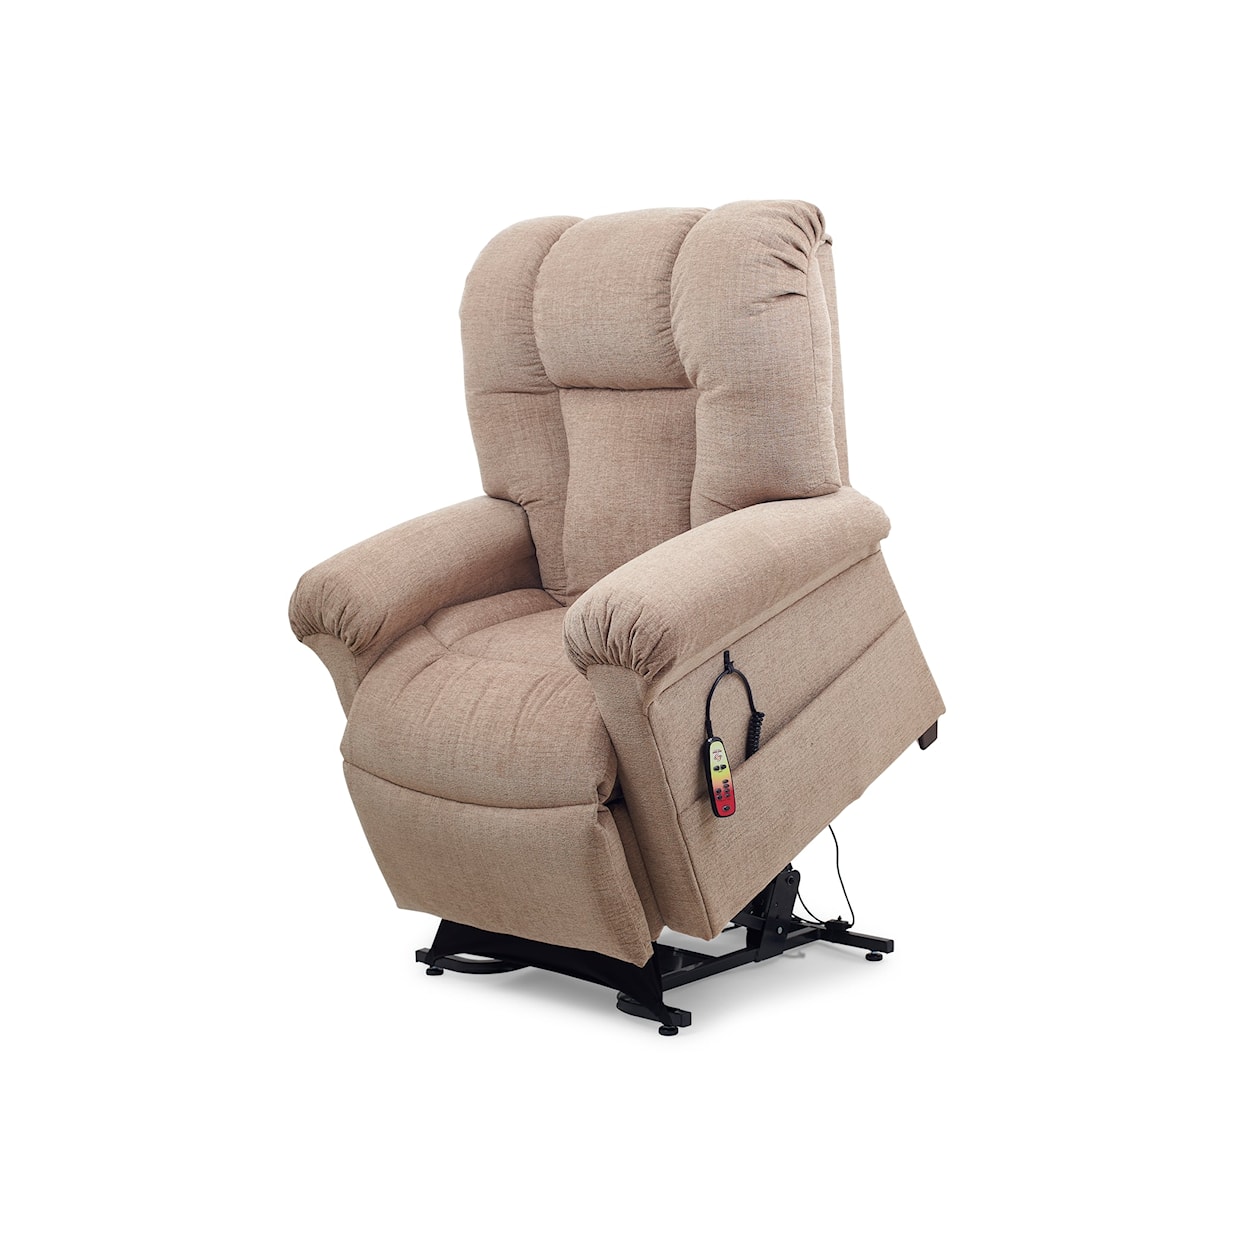 UltraComfort Sol Sol Lift Chair with HeatWave